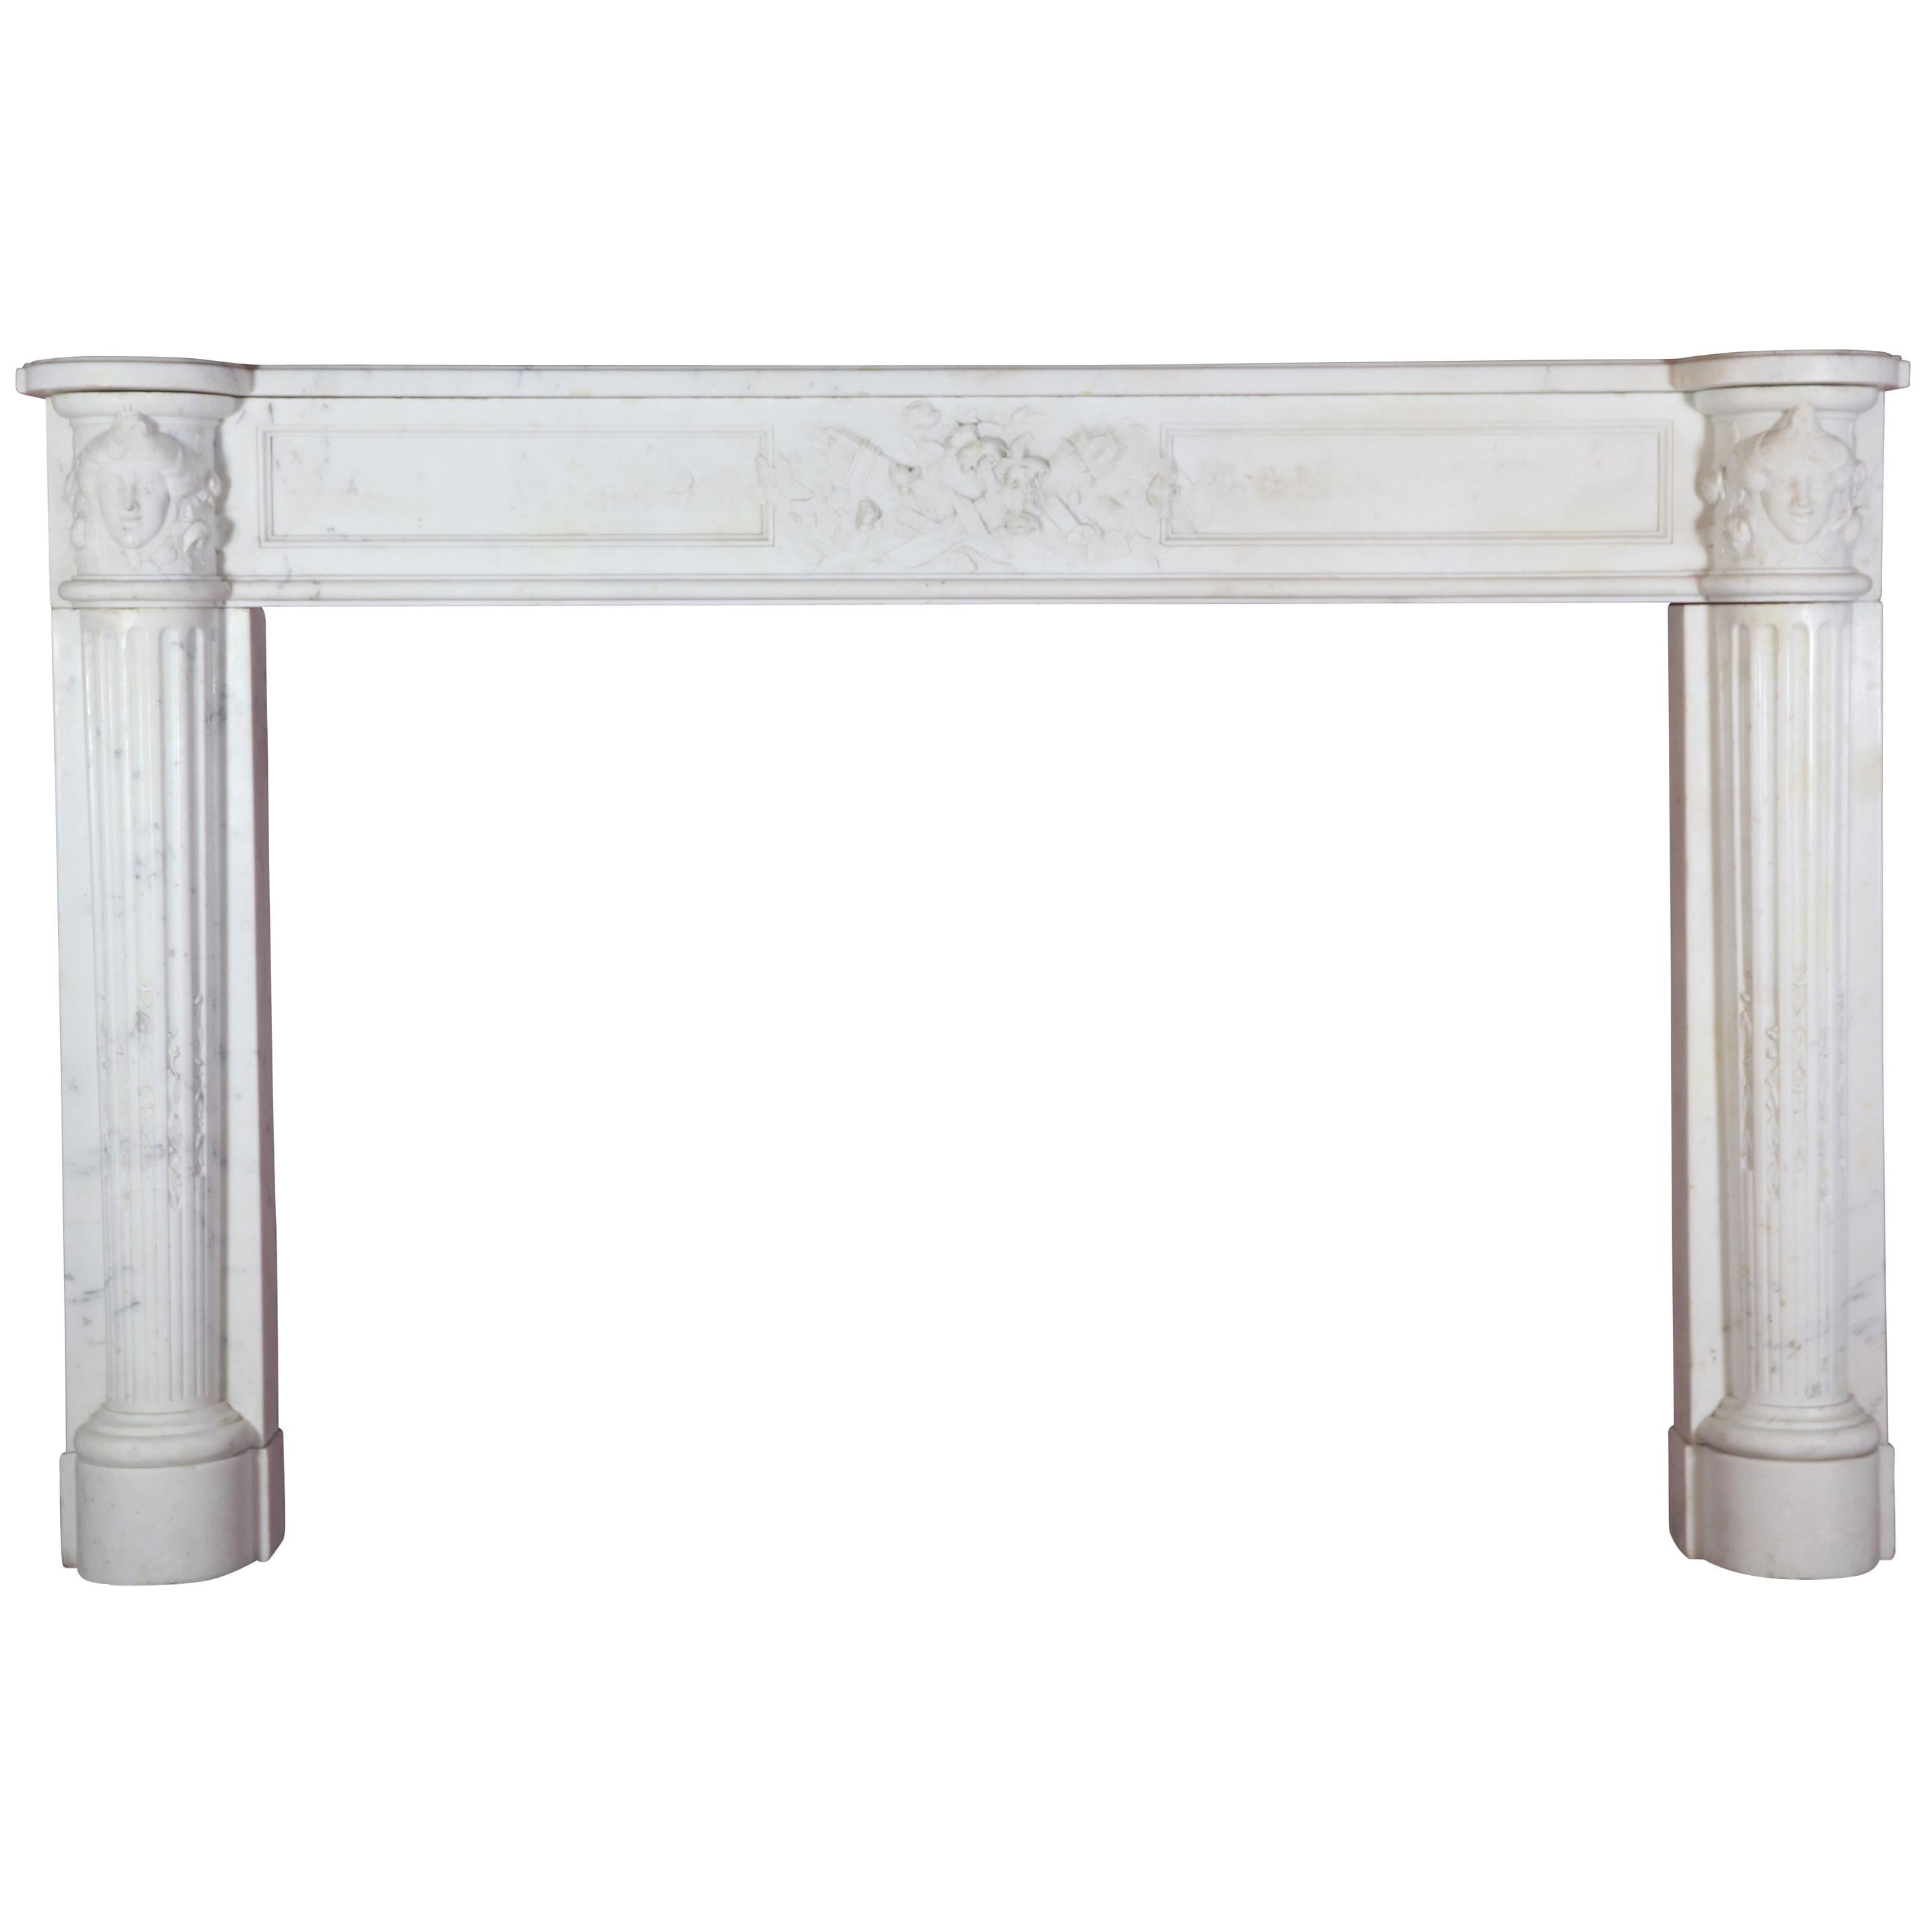 Fine French White 18th Century Carrara Marble Antique Fireplace Surround